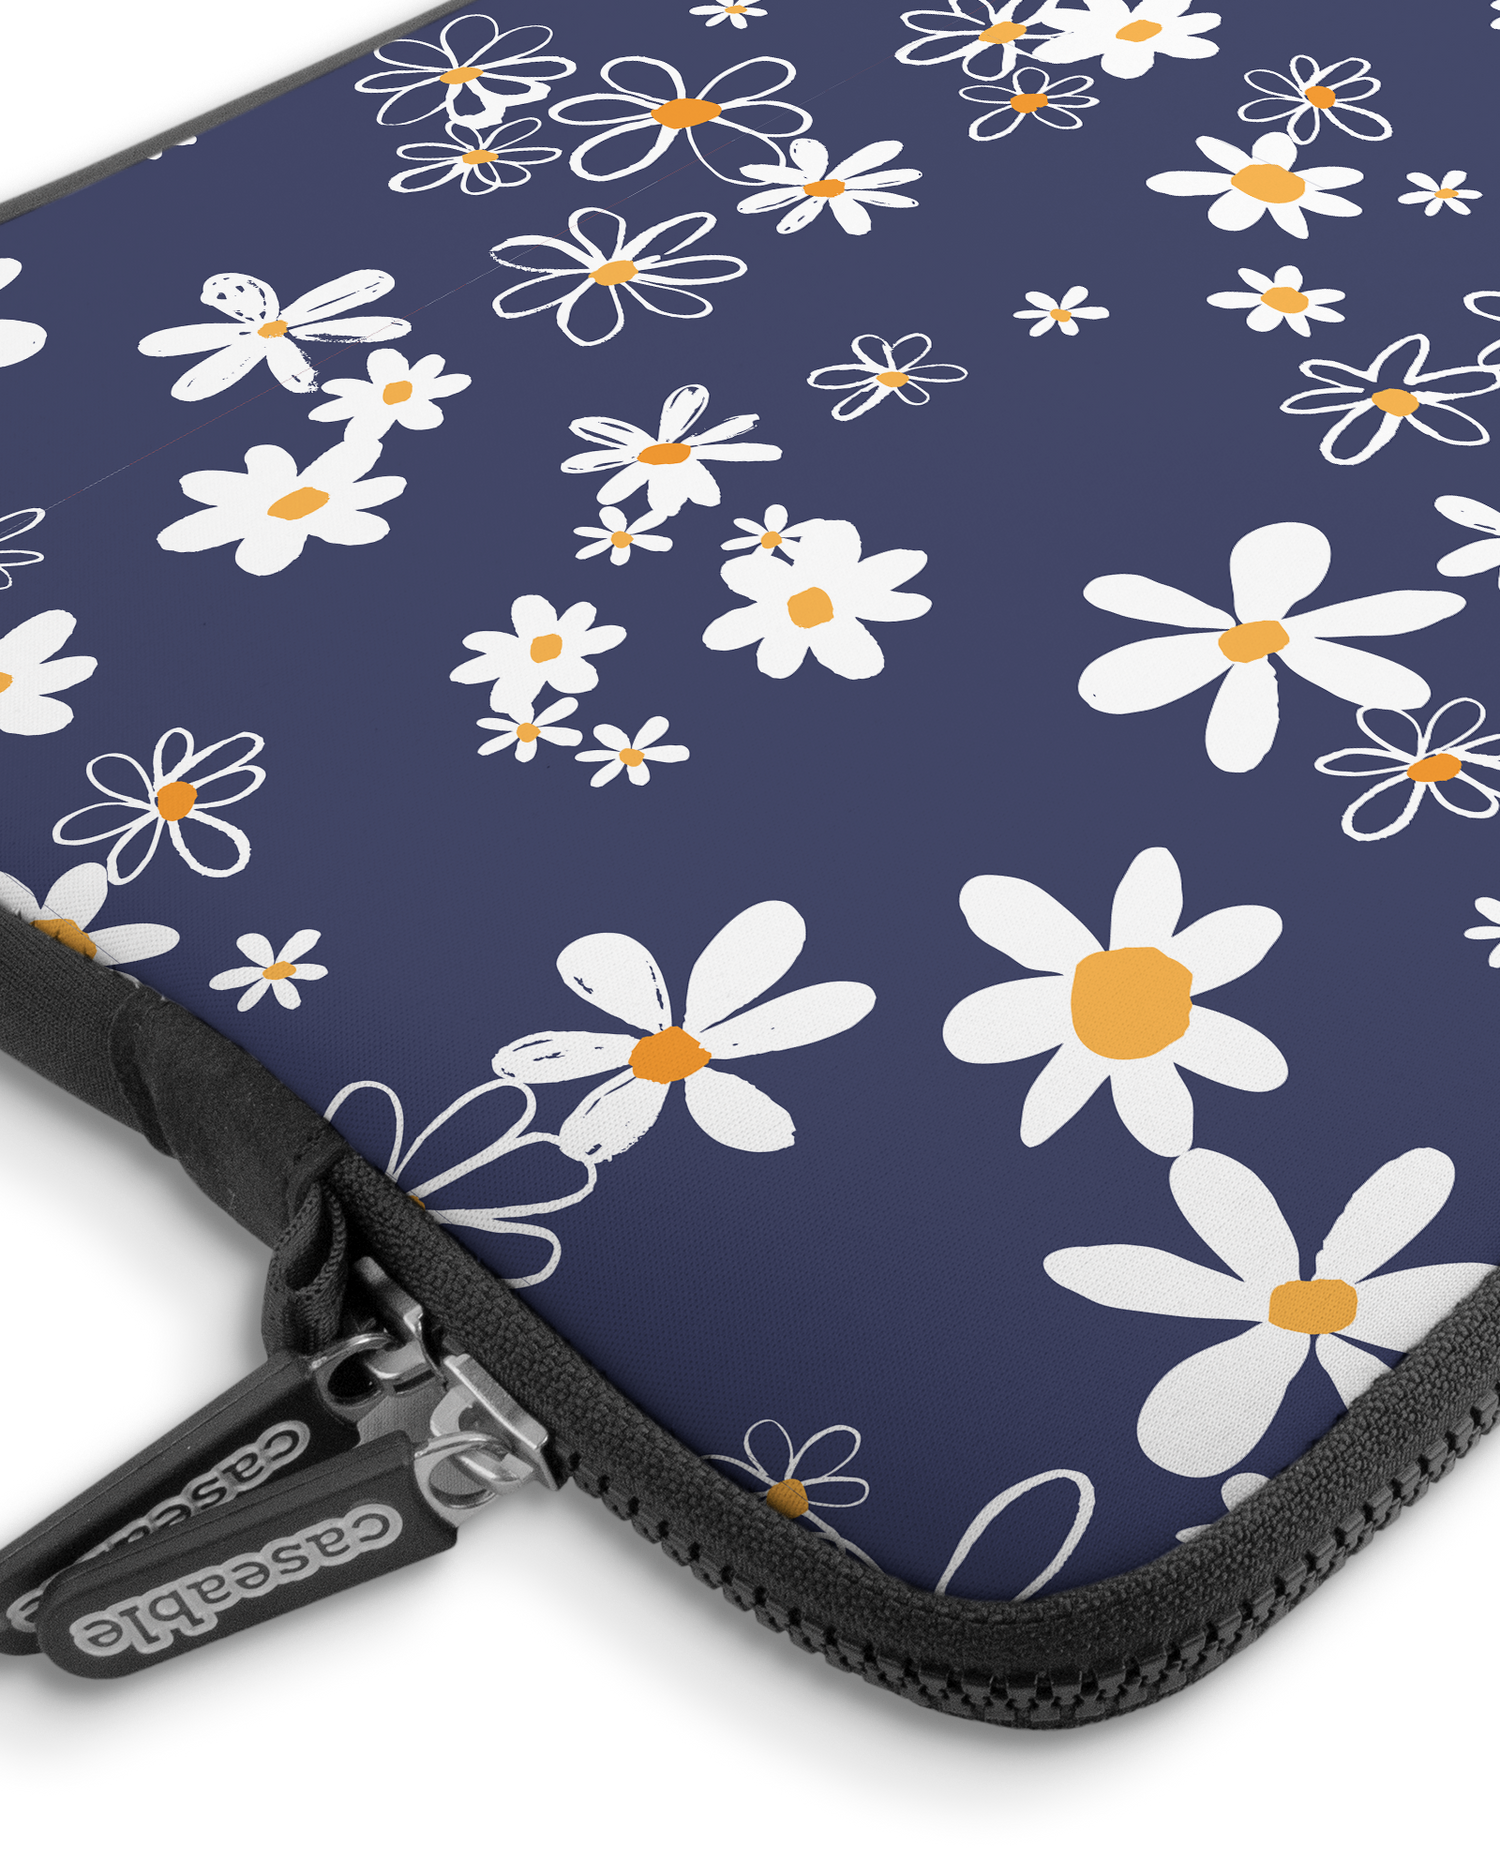 Navy Daisies Premium Laptop Bag 13-14 inch with device inside